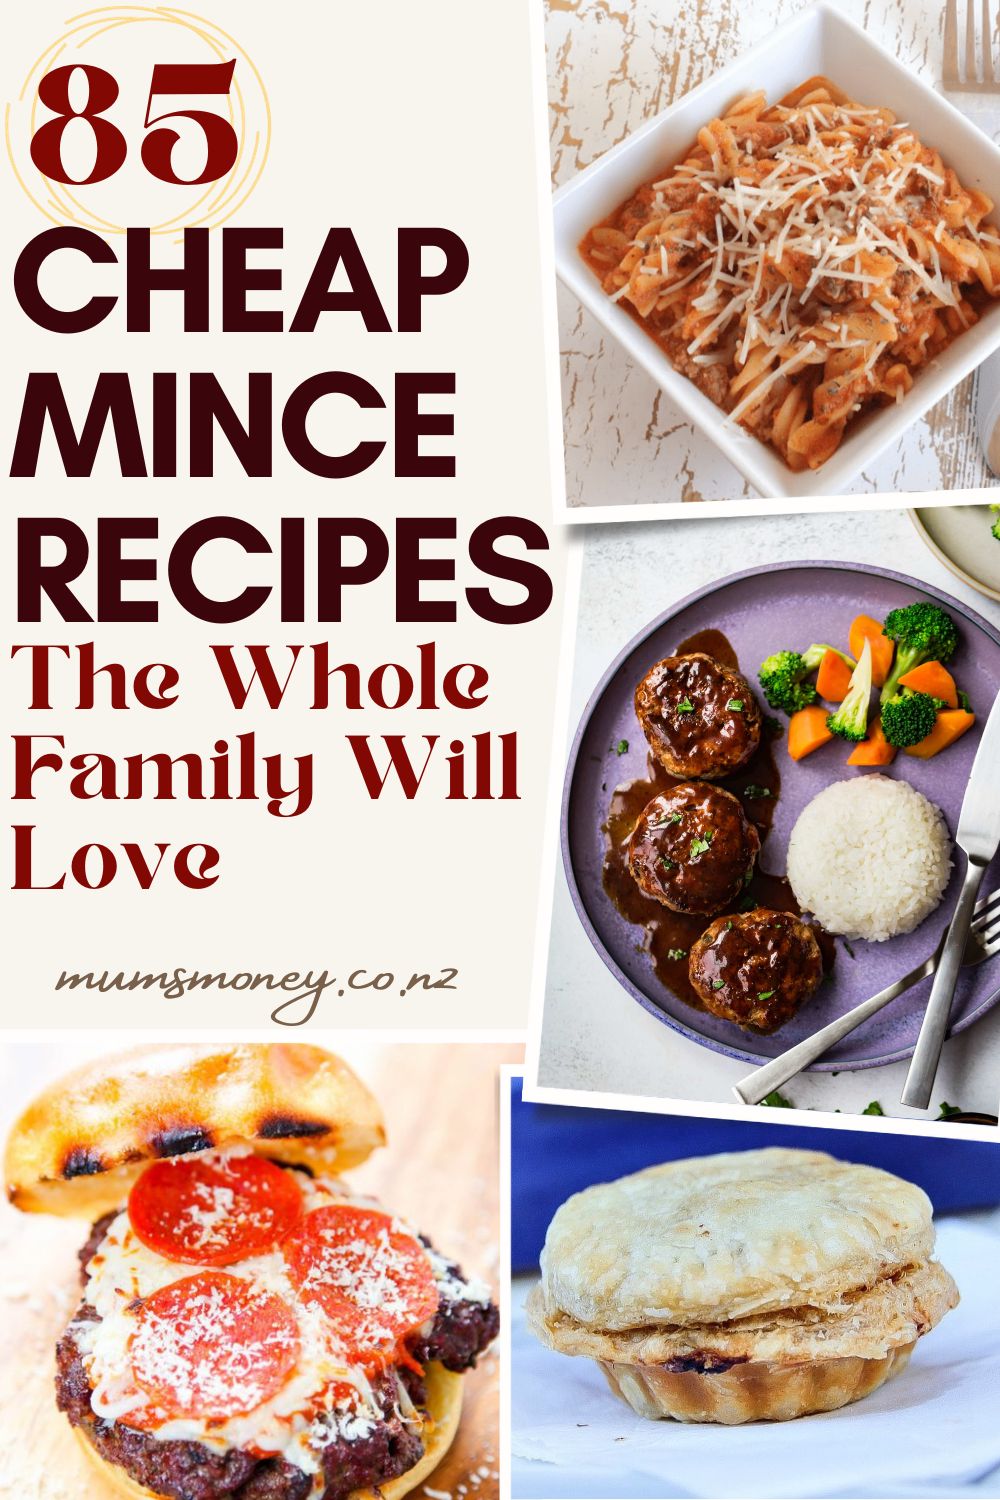  Cheap Mince Recipes The Whole Family Will Love Pin Image